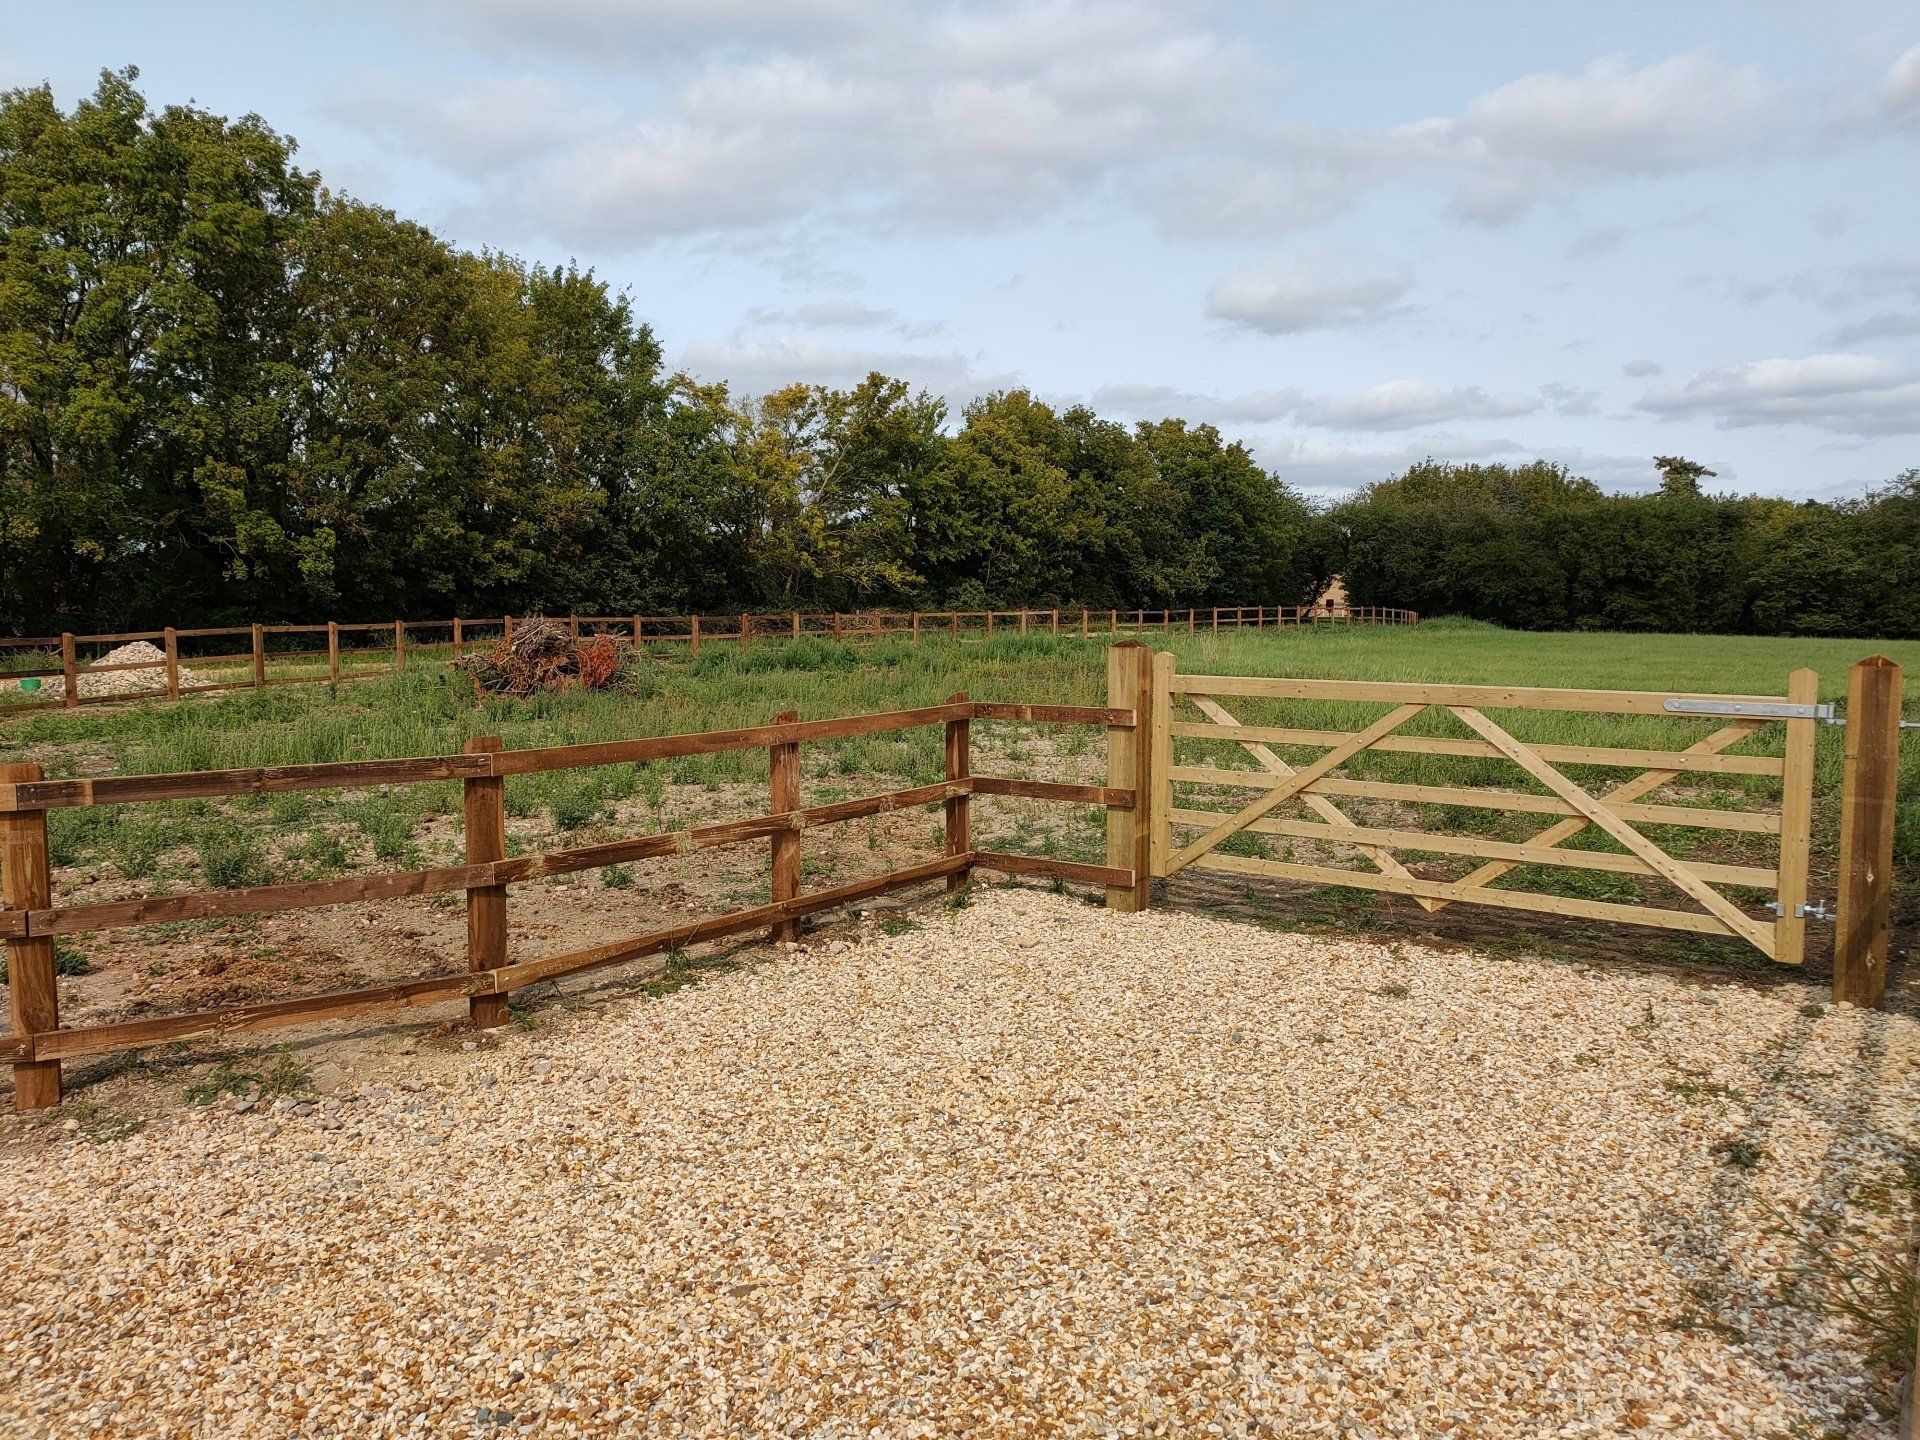 A wide wooden field gate allows access by vehicles. Blends in with wooden fence.